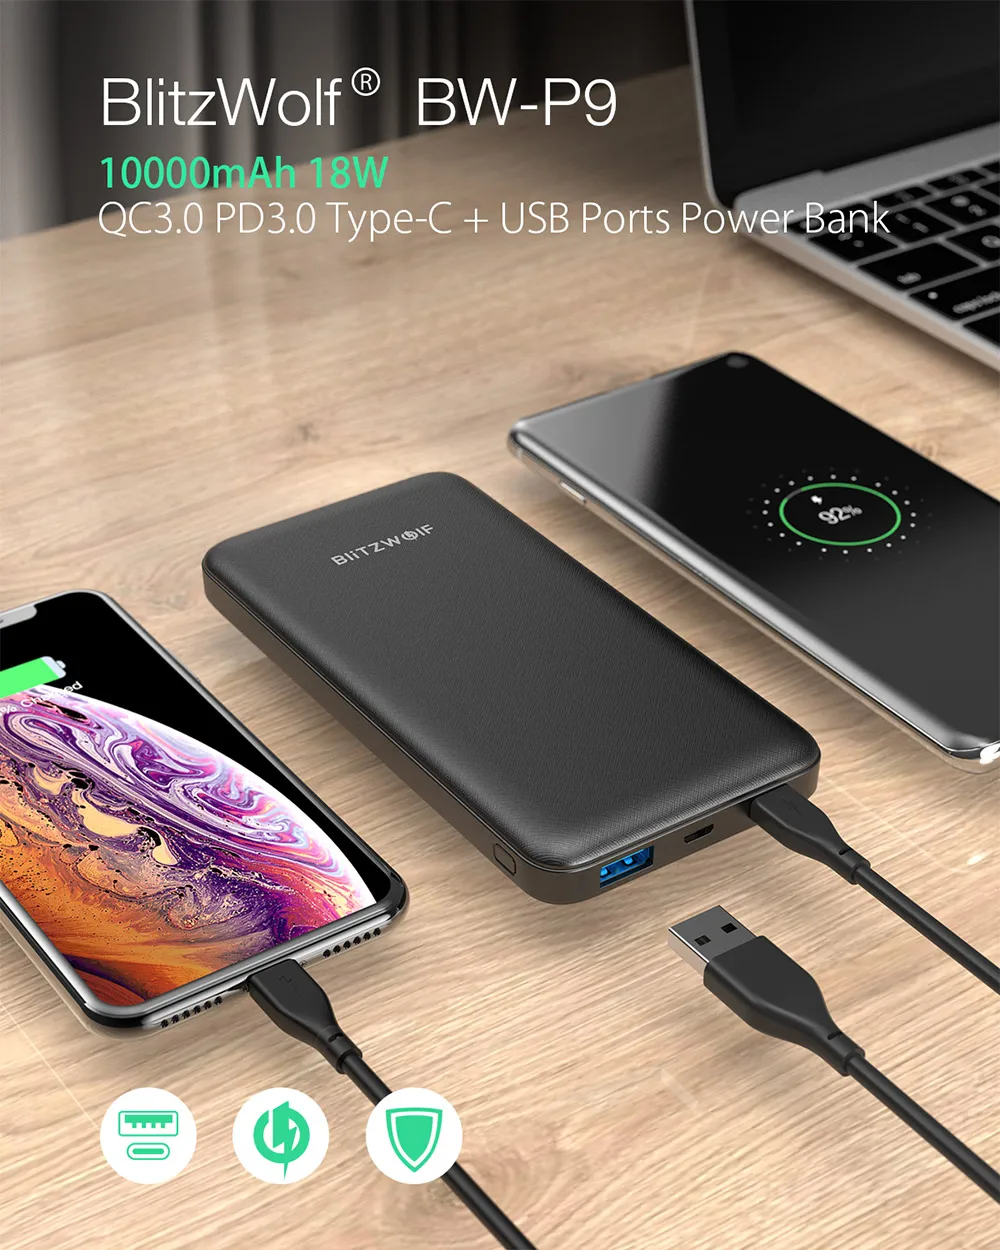 small power bank BlitzWolf BW-P9 18W 10000mAh USB PD QC 3.0 Power Bank Type C Fast Charging Dual for iPhone 12 Pro Max for Xiaomi for Huawei portable cell phone charger